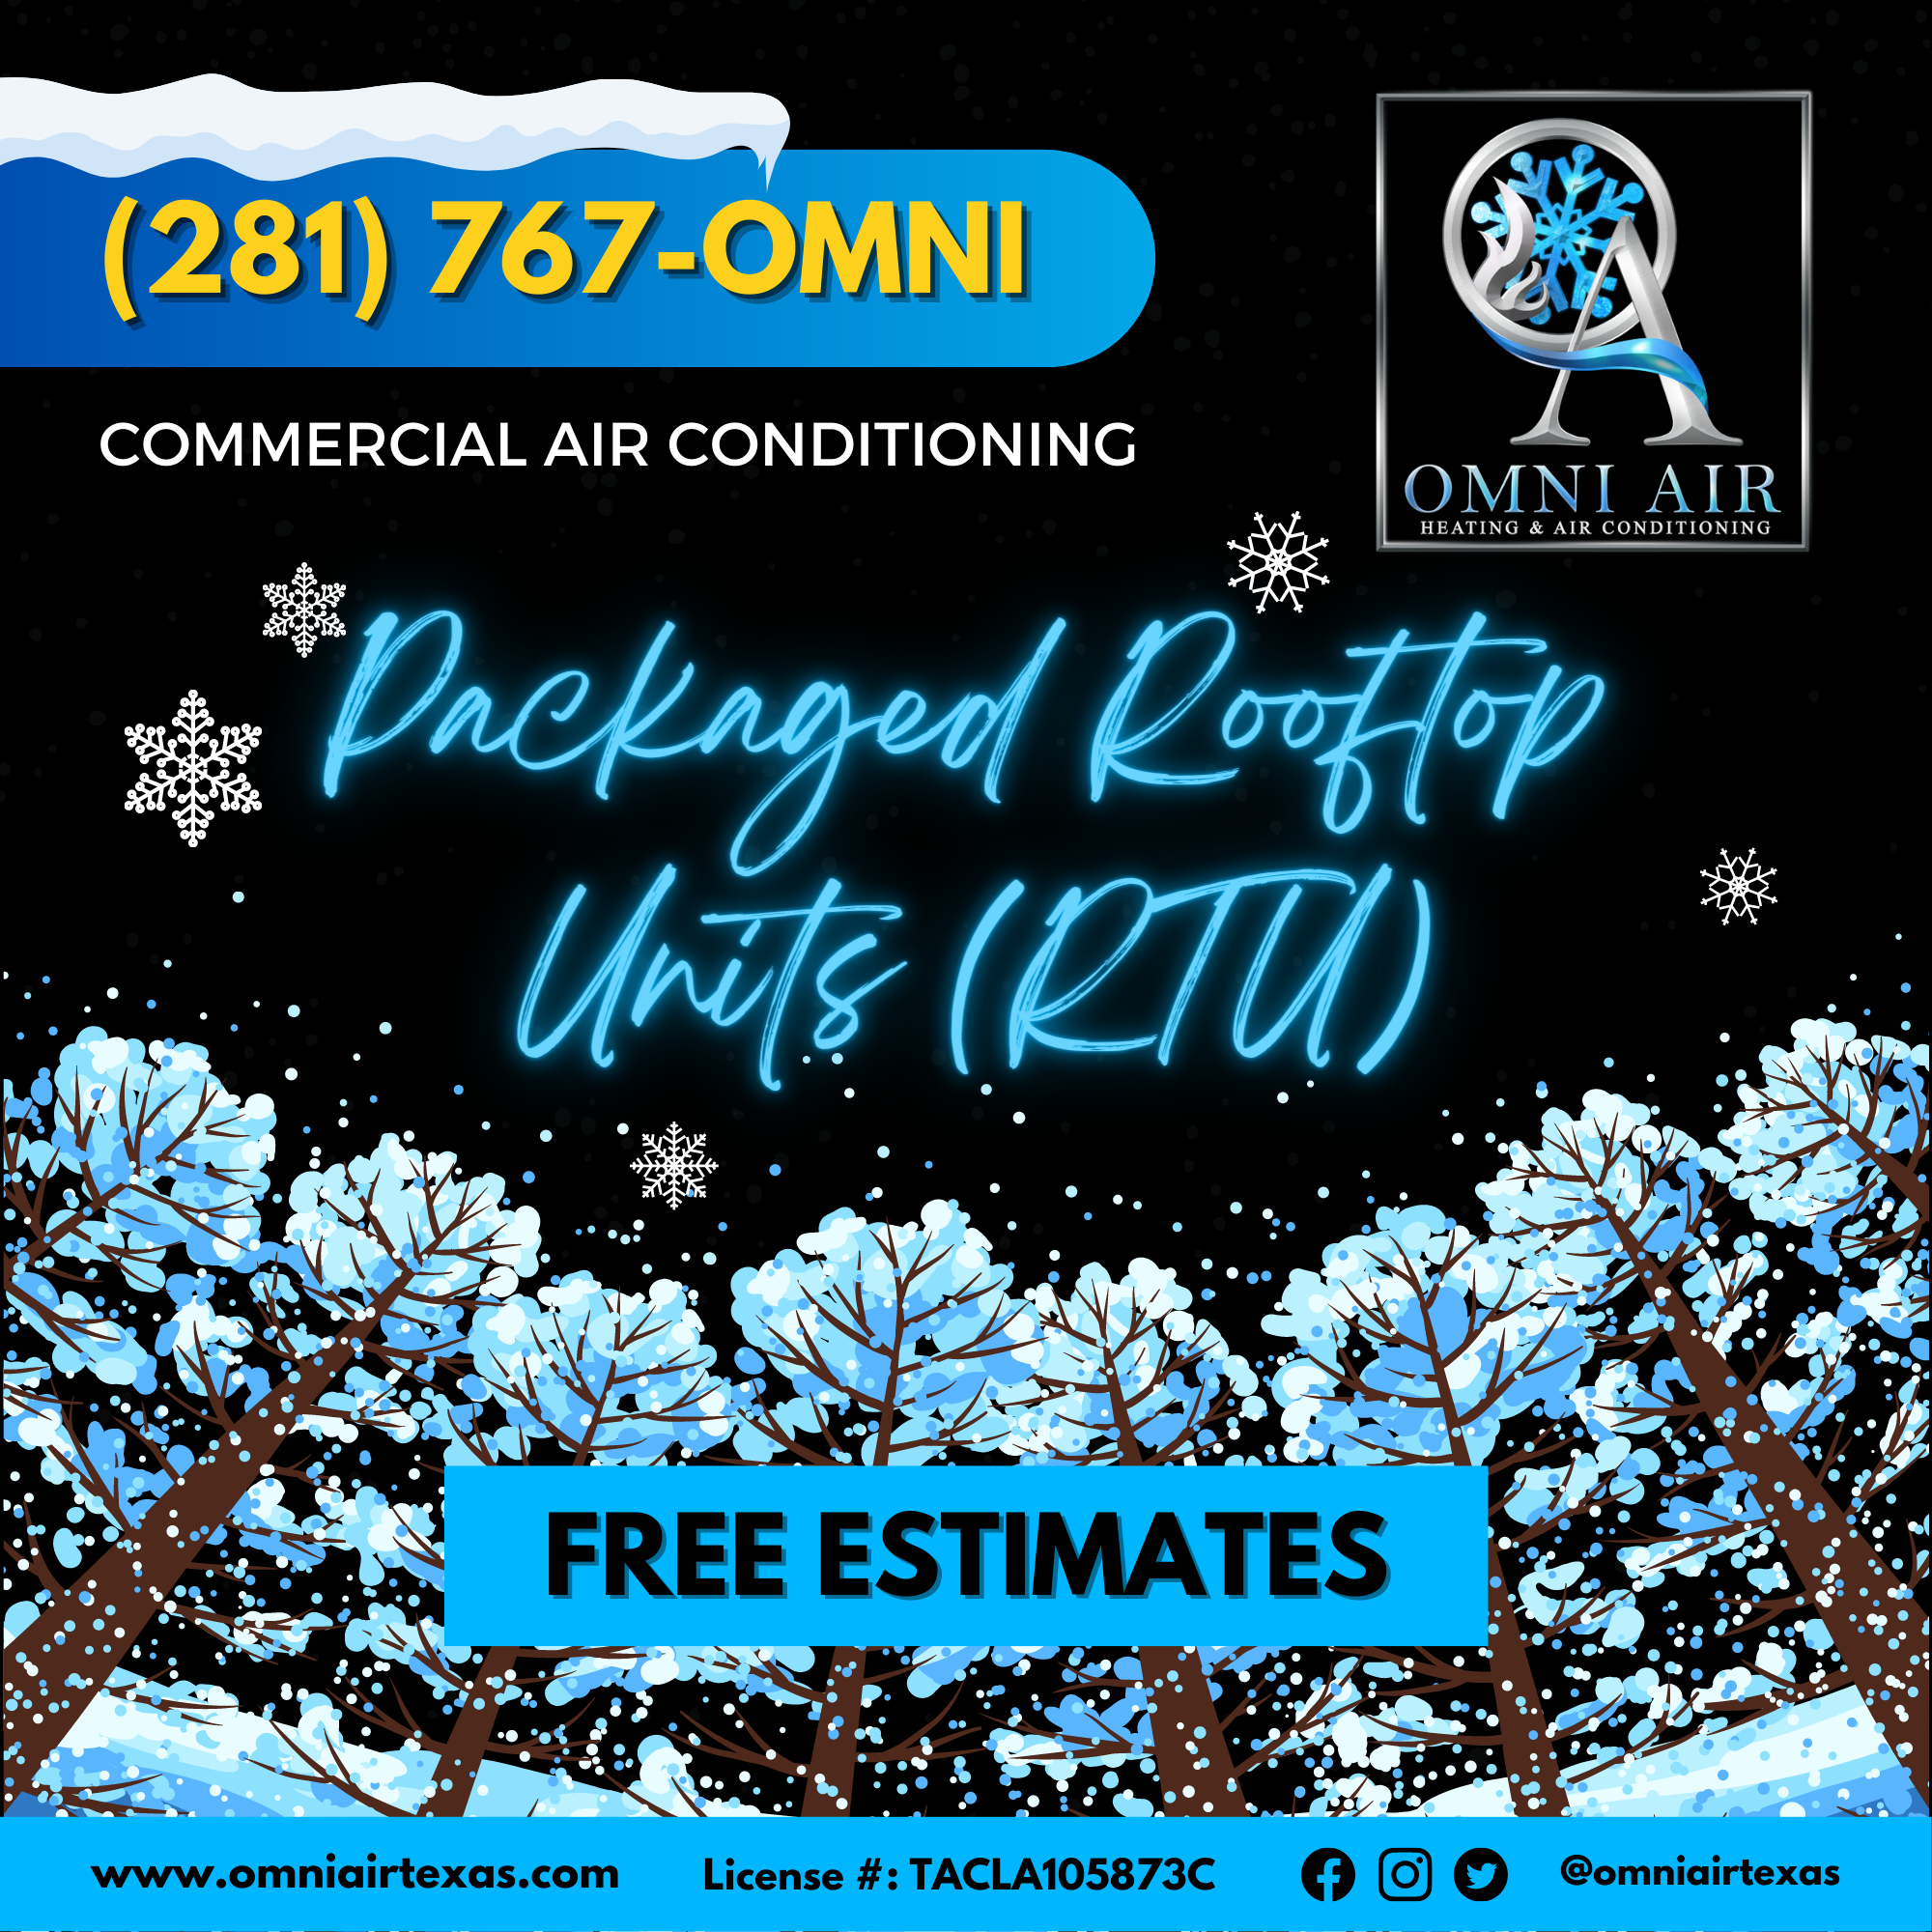 Packaged Rooftop Units (RTU) - Conroe Commercial Air Conditioning